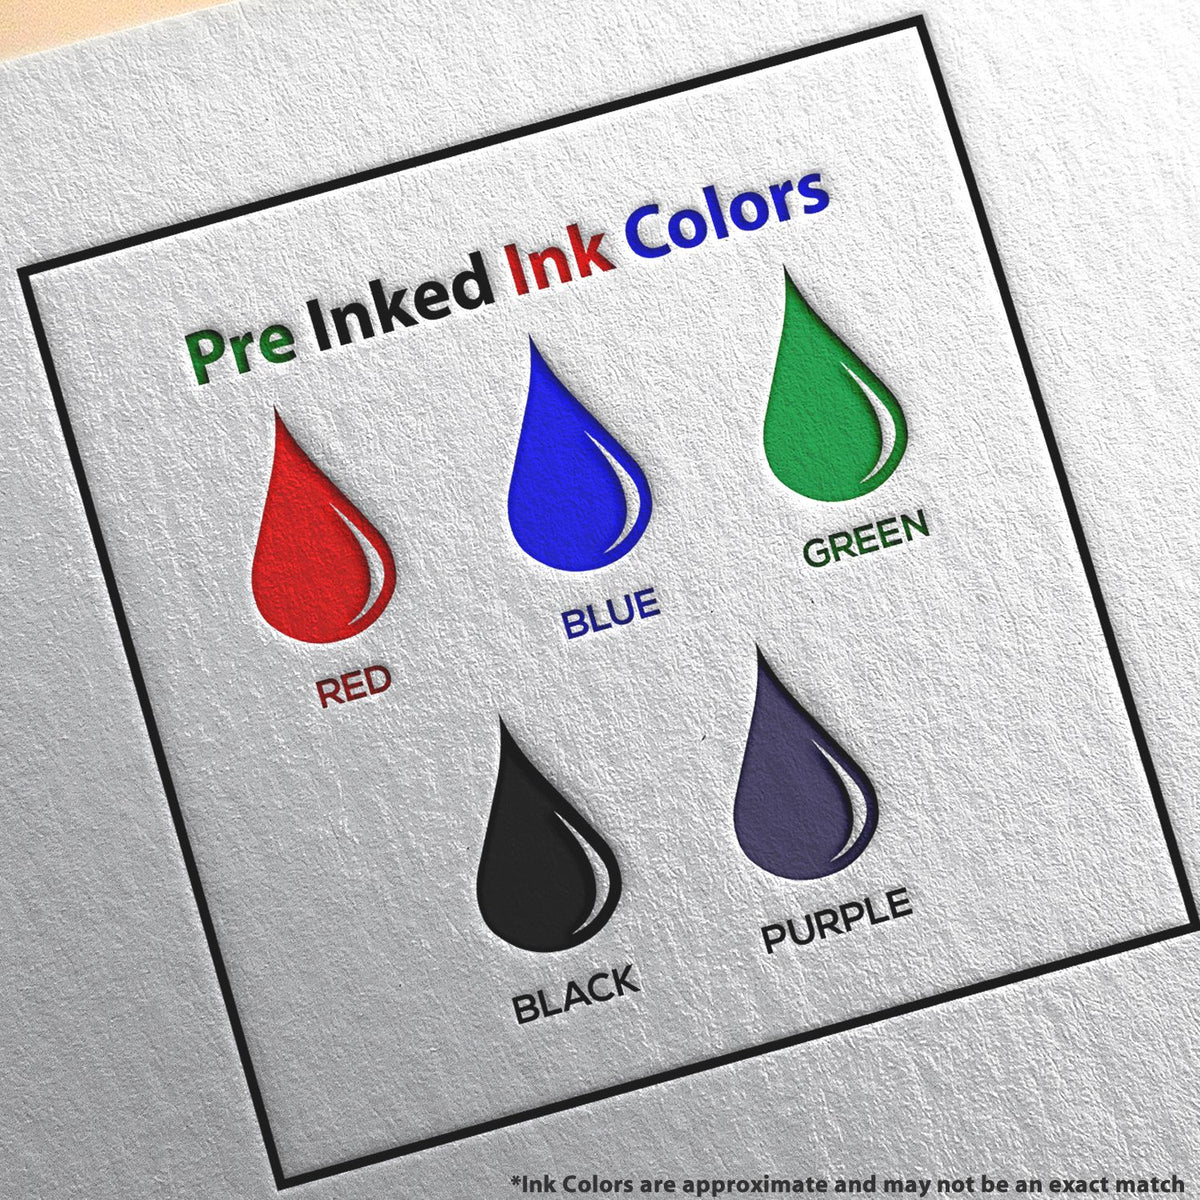 A picture showing the different ink colors or hues available for the Premium MaxLight Pre-Inked New Jersey Engineering Stamp product.